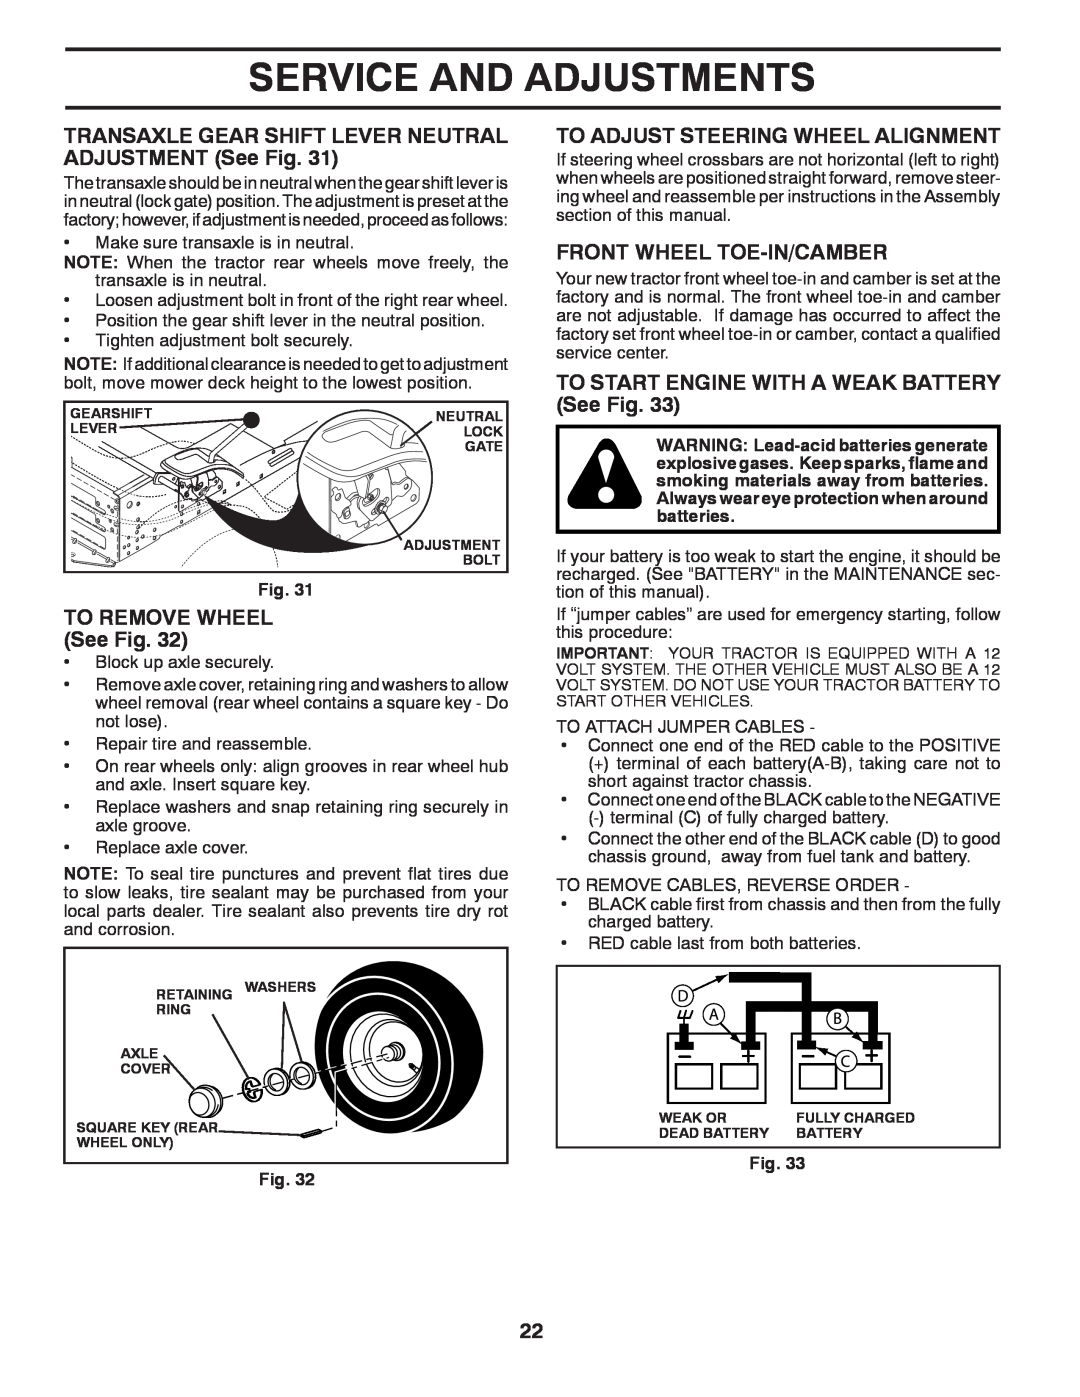 Poulan PXT12530 Service And Adjustments, TRANSAXLE GEAR SHIFT LEVER NEUTRAL ADJUSTMENT See Fig, TO REMOVE WHEEL See Fig 